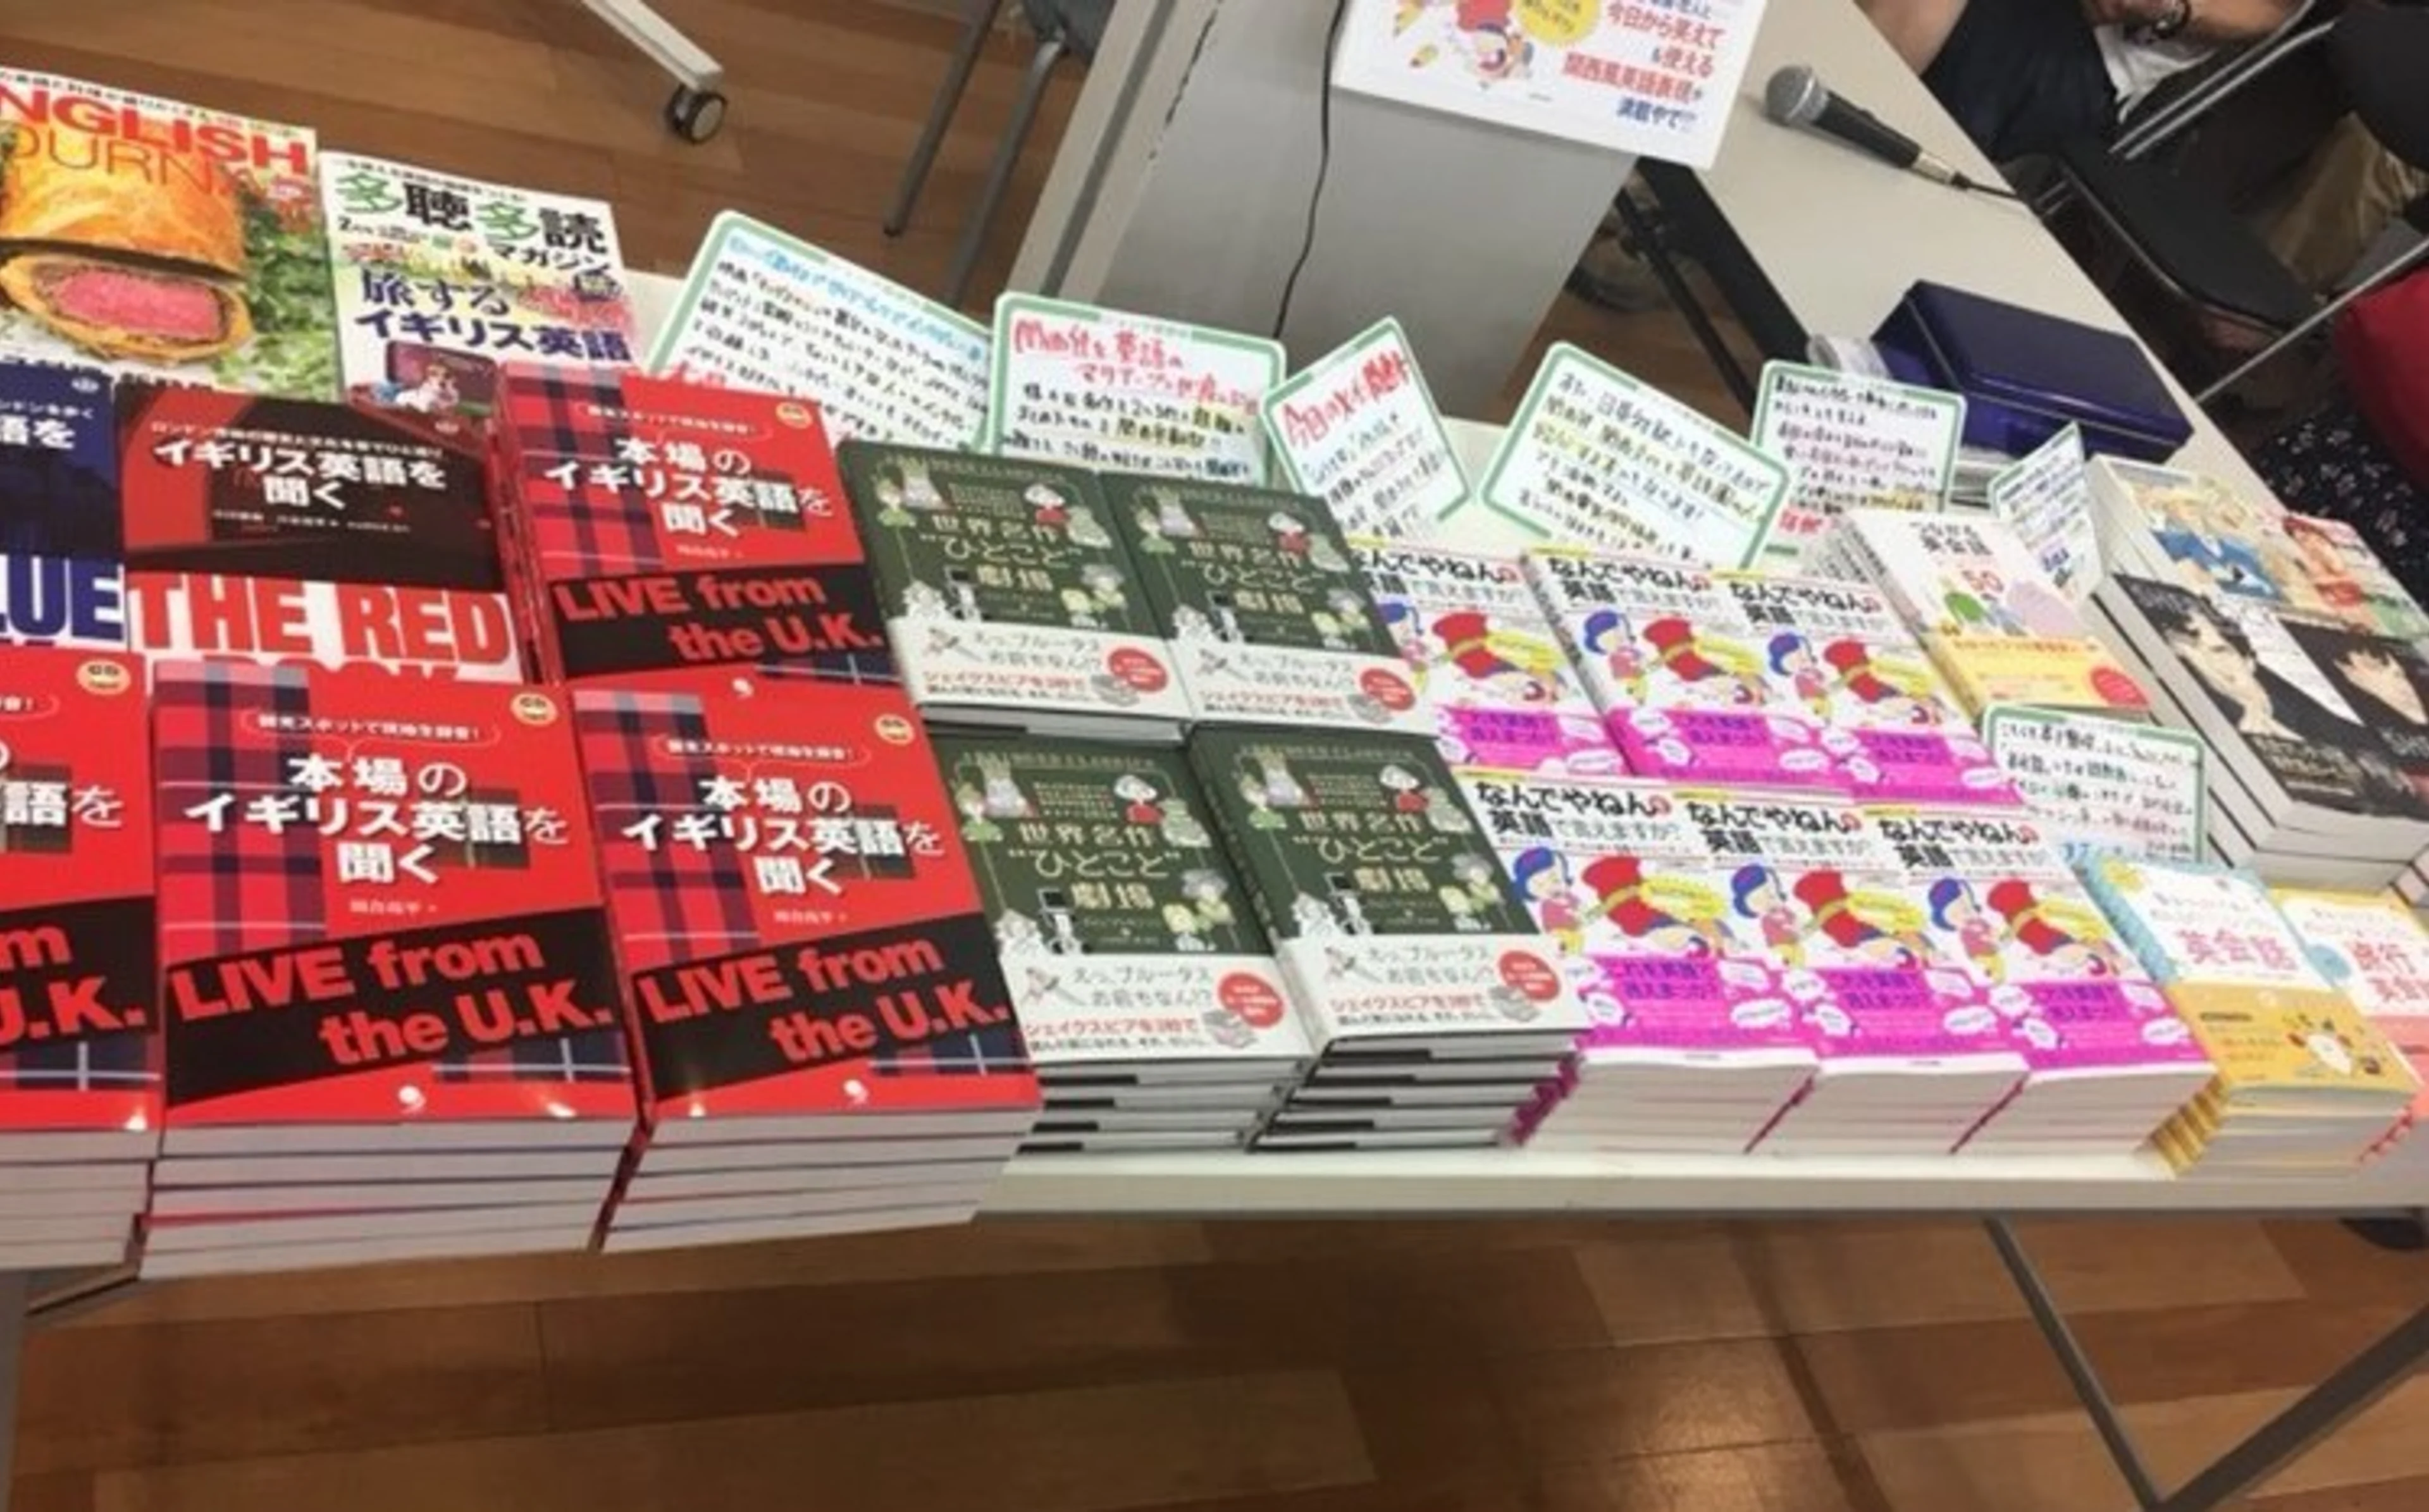 Ryohei's books being displayed at the bookstore